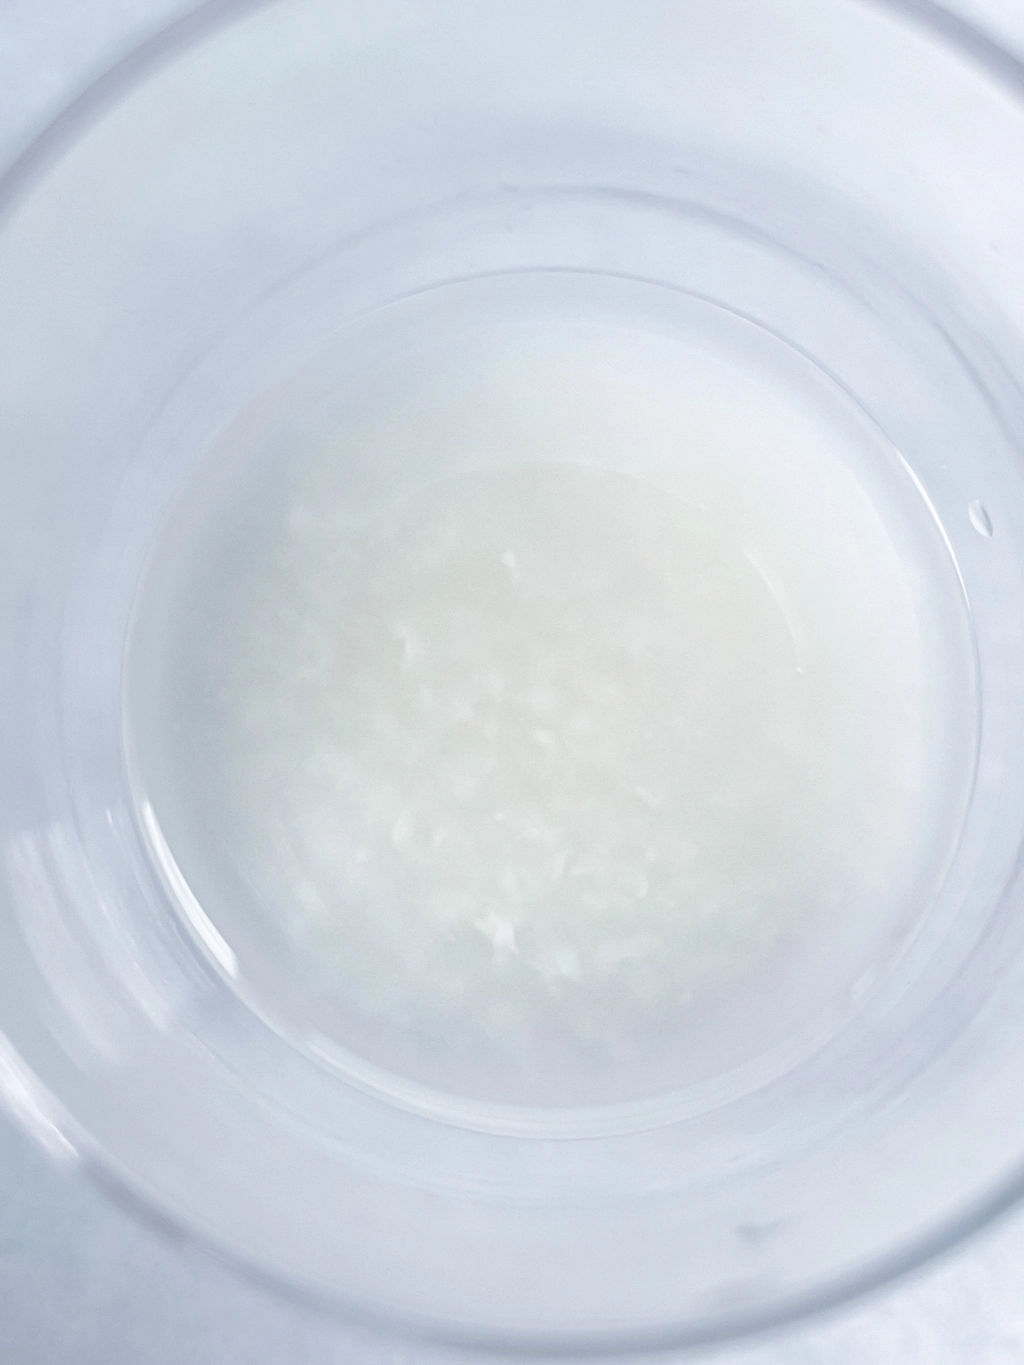 Artwork showing a close-up of amazake in a transparent cup. The background is also white, making it difficult to see the outlines clearly, and the boundaries seem to merge together.